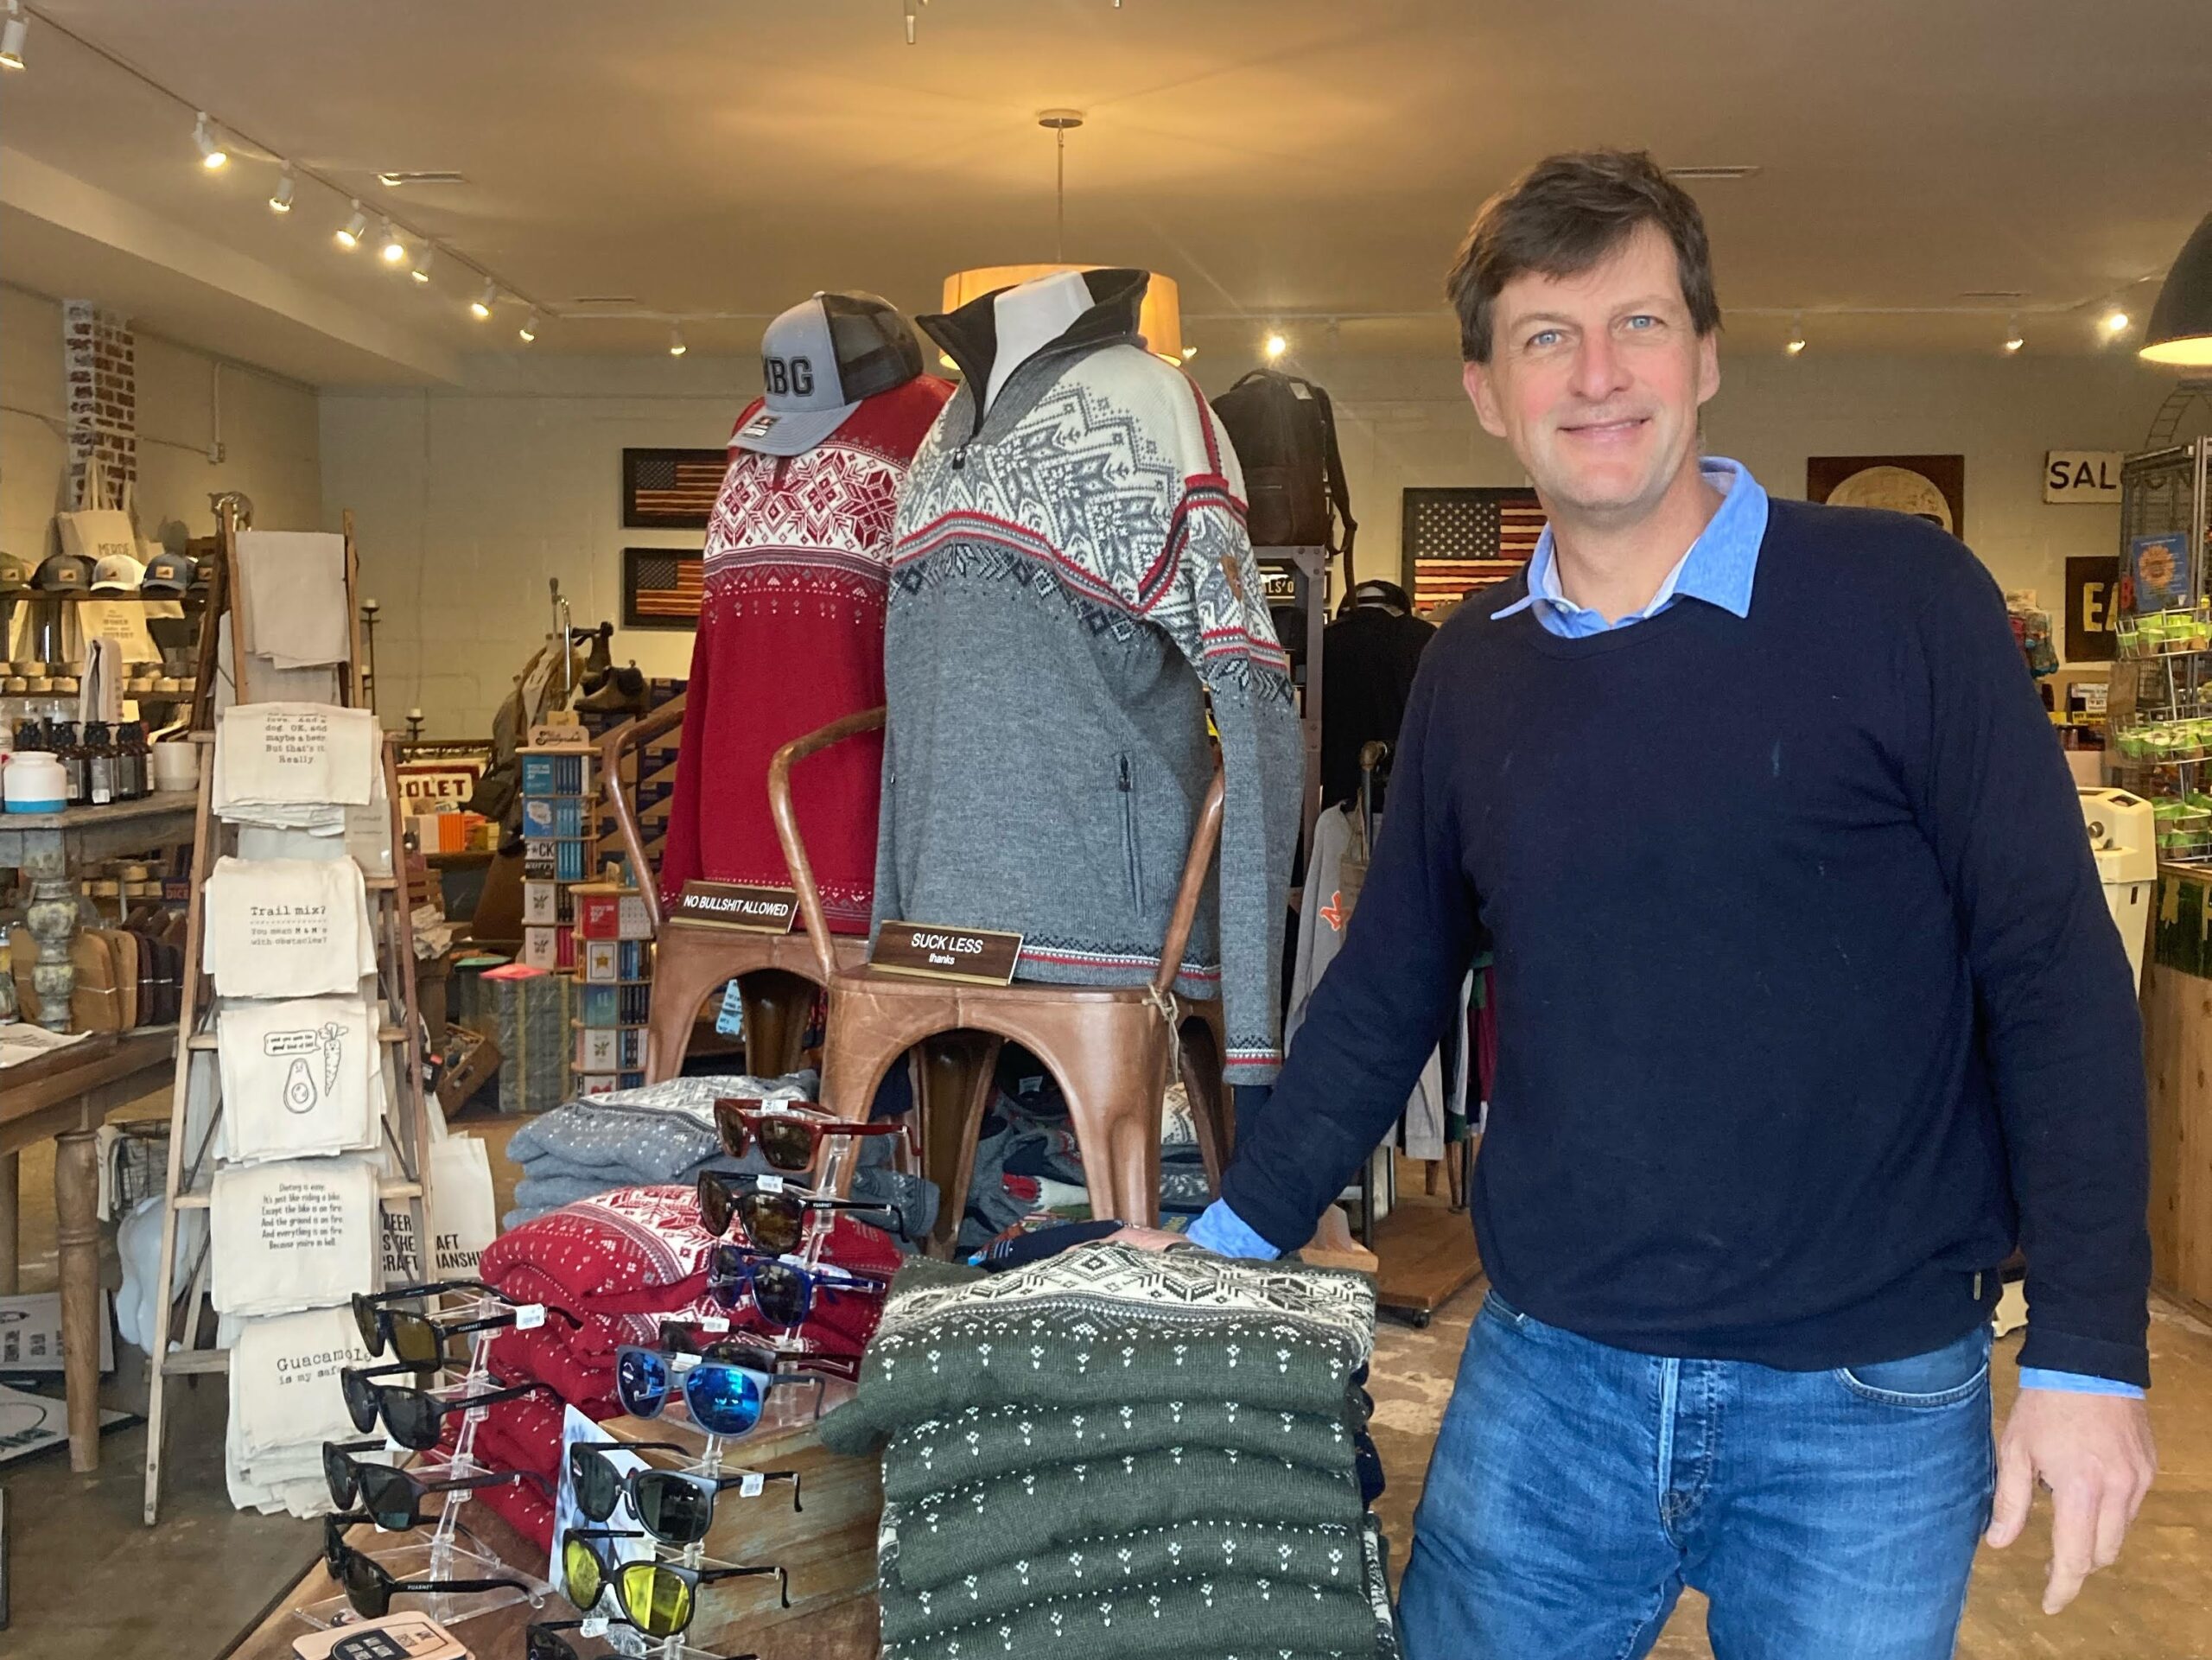 Boutique moguls aim to entertain clients at new retail outlet in Carytown